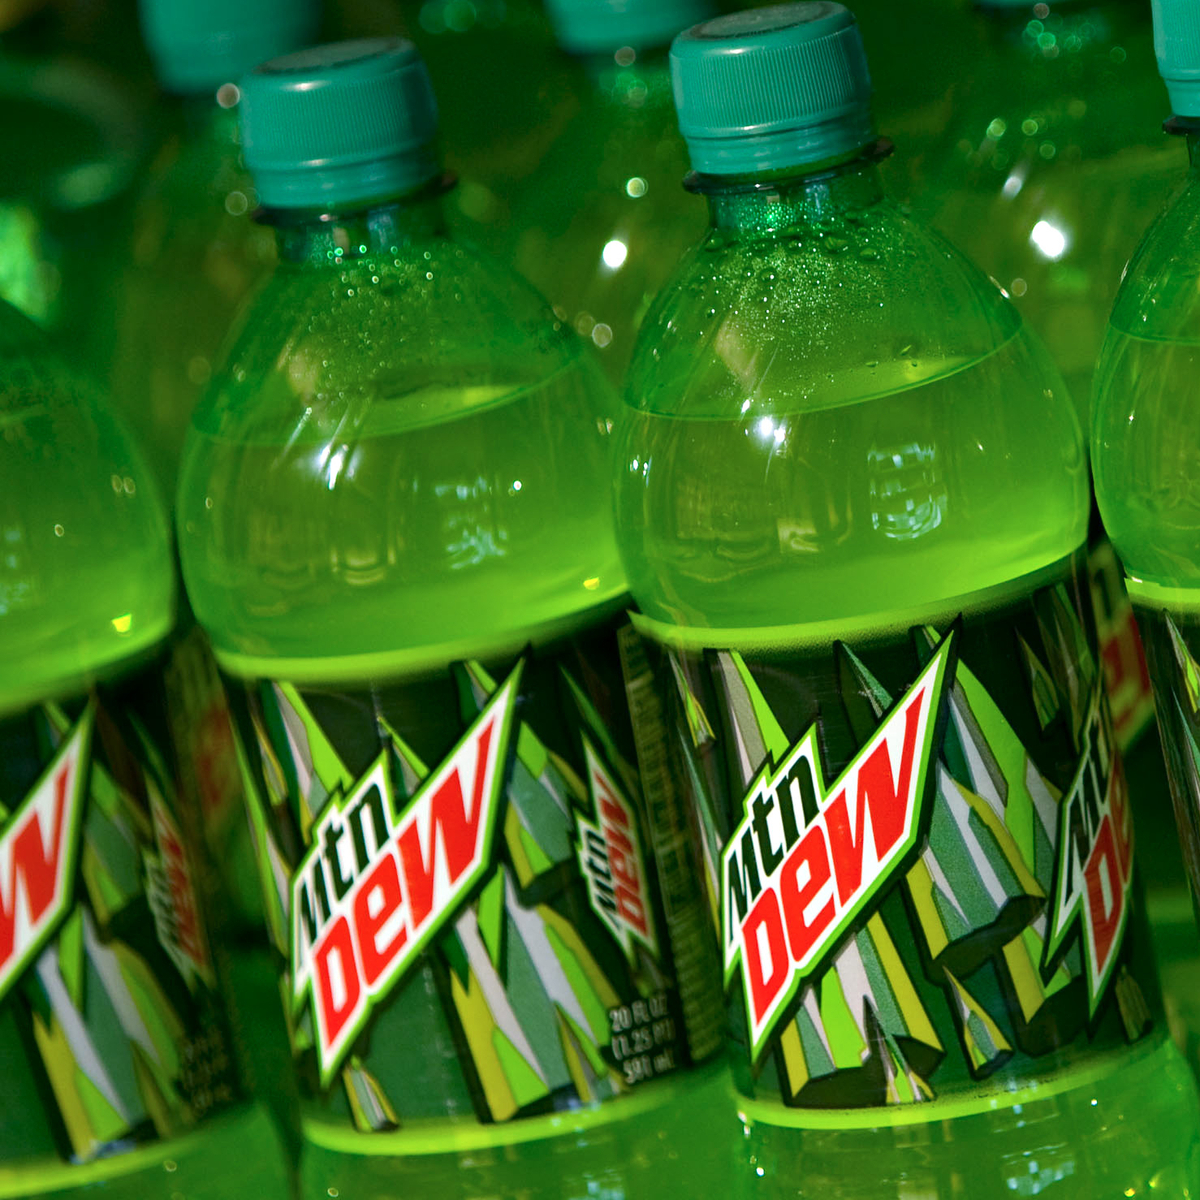 Woman Allegedly Poured Mountain Dew on Herself to Hide Murder Evidence